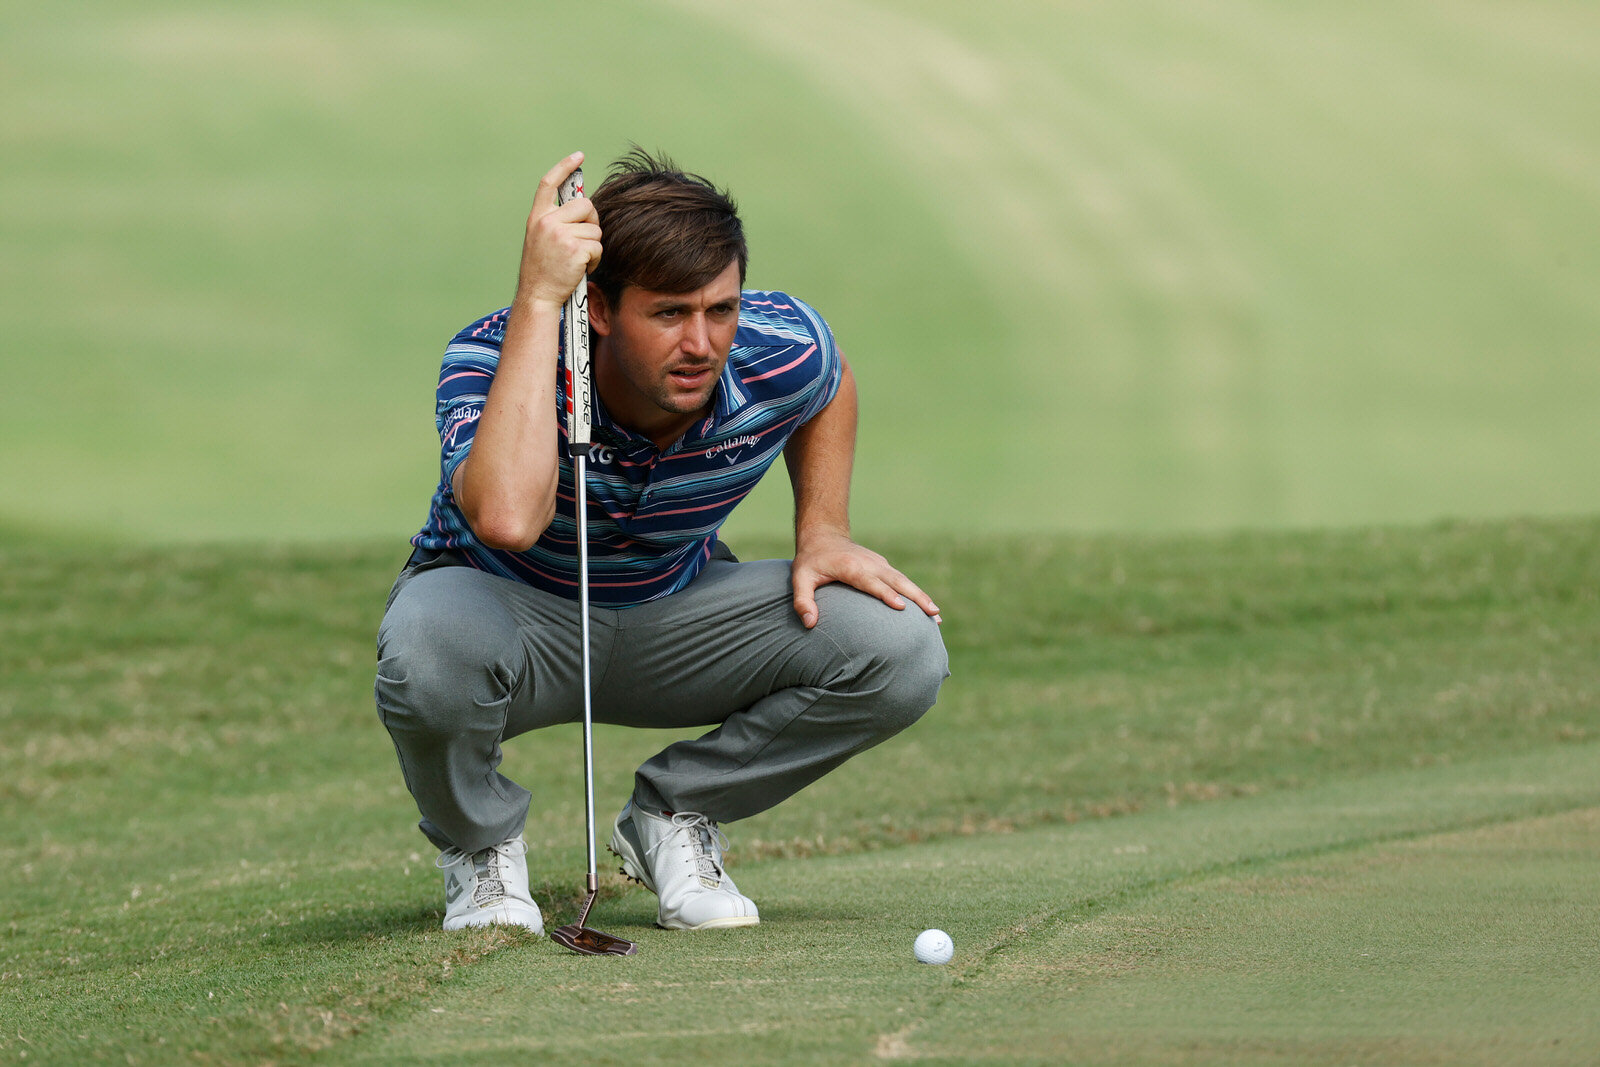  SOUTHAMPTON, BERMUDA - NOVEMBER 01: Ollie Schniederjans of the United States lines up a putt on the sixth green during the final round of the Bermuda Championship at Port Royal Golf Course on November 01, 2020 in Southampton, Bermuda. (Photo by Greg